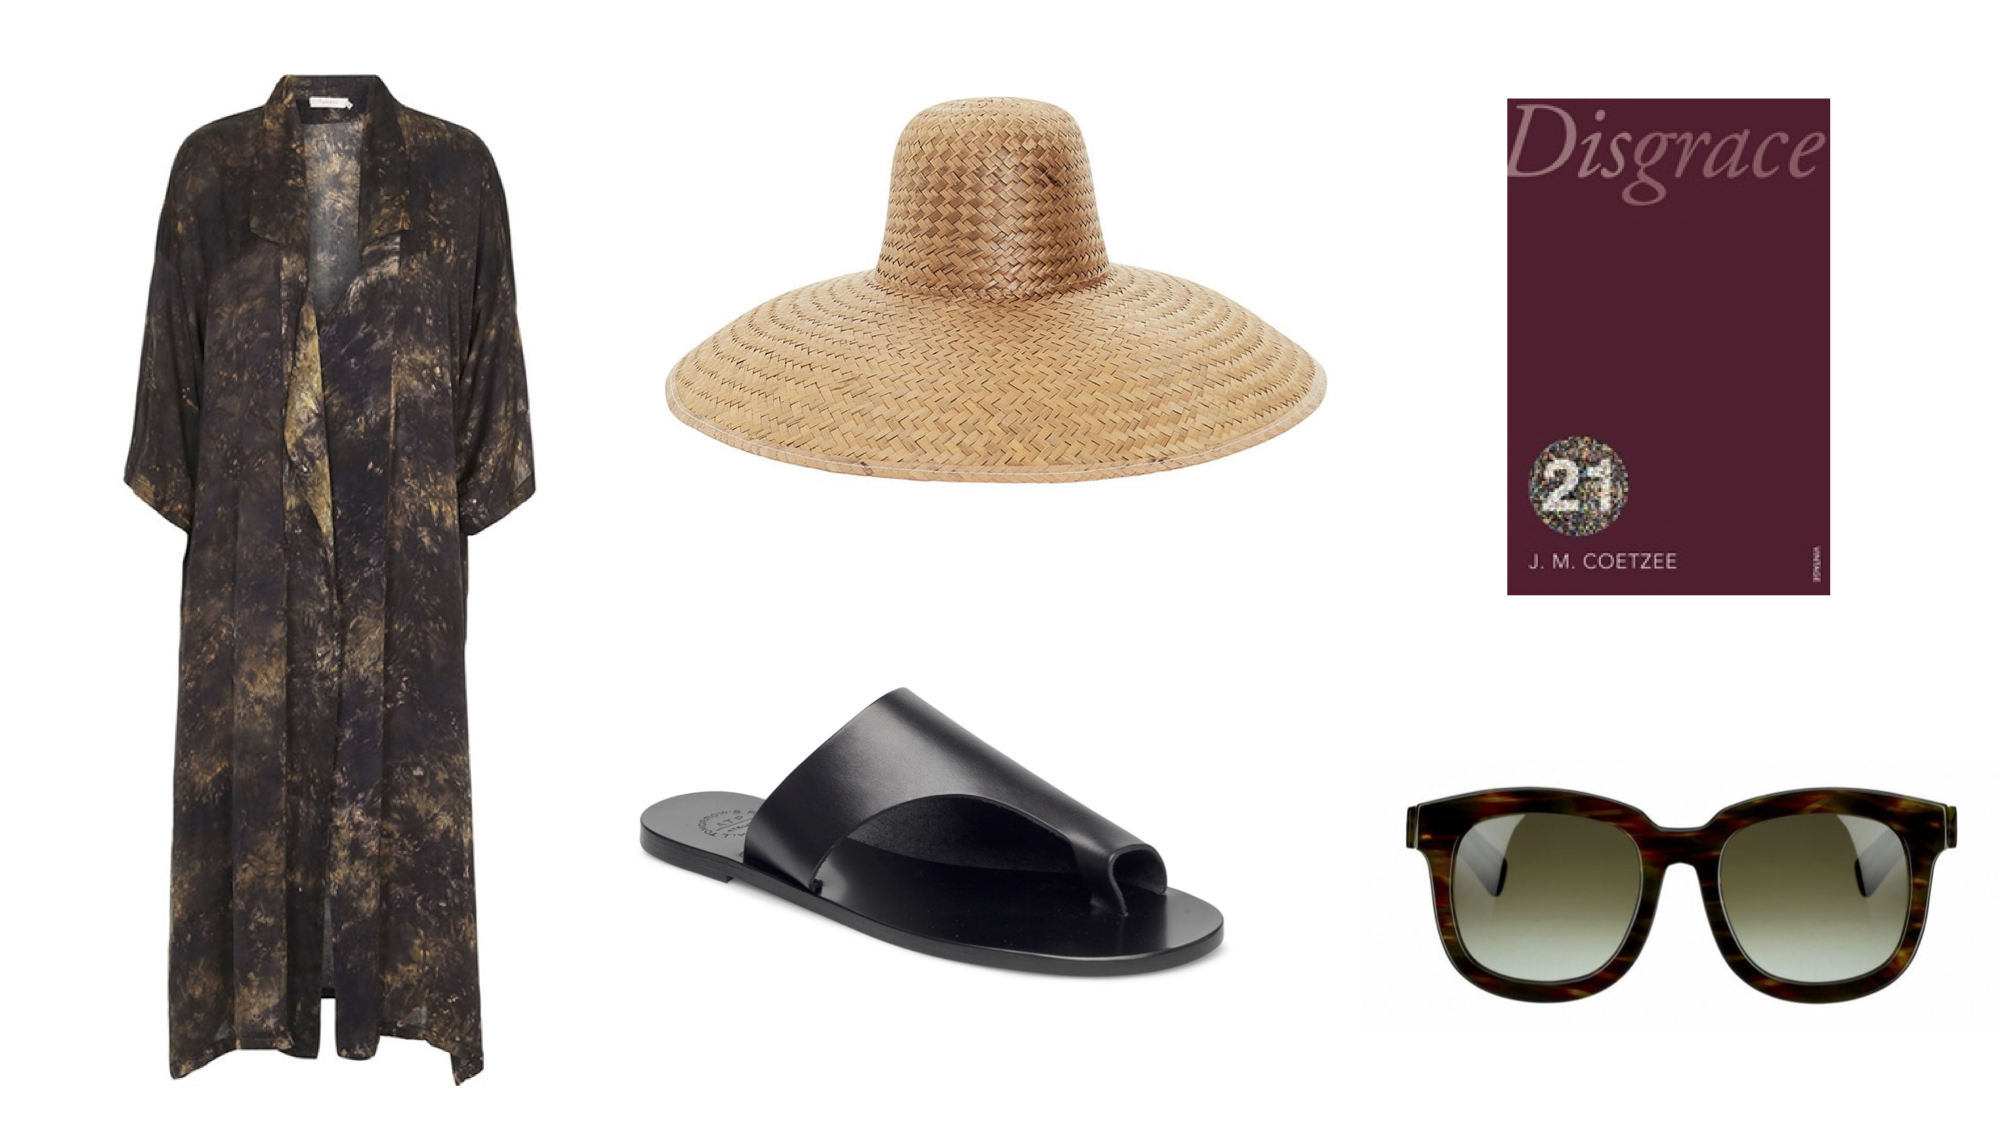 What to Pack for South Africa